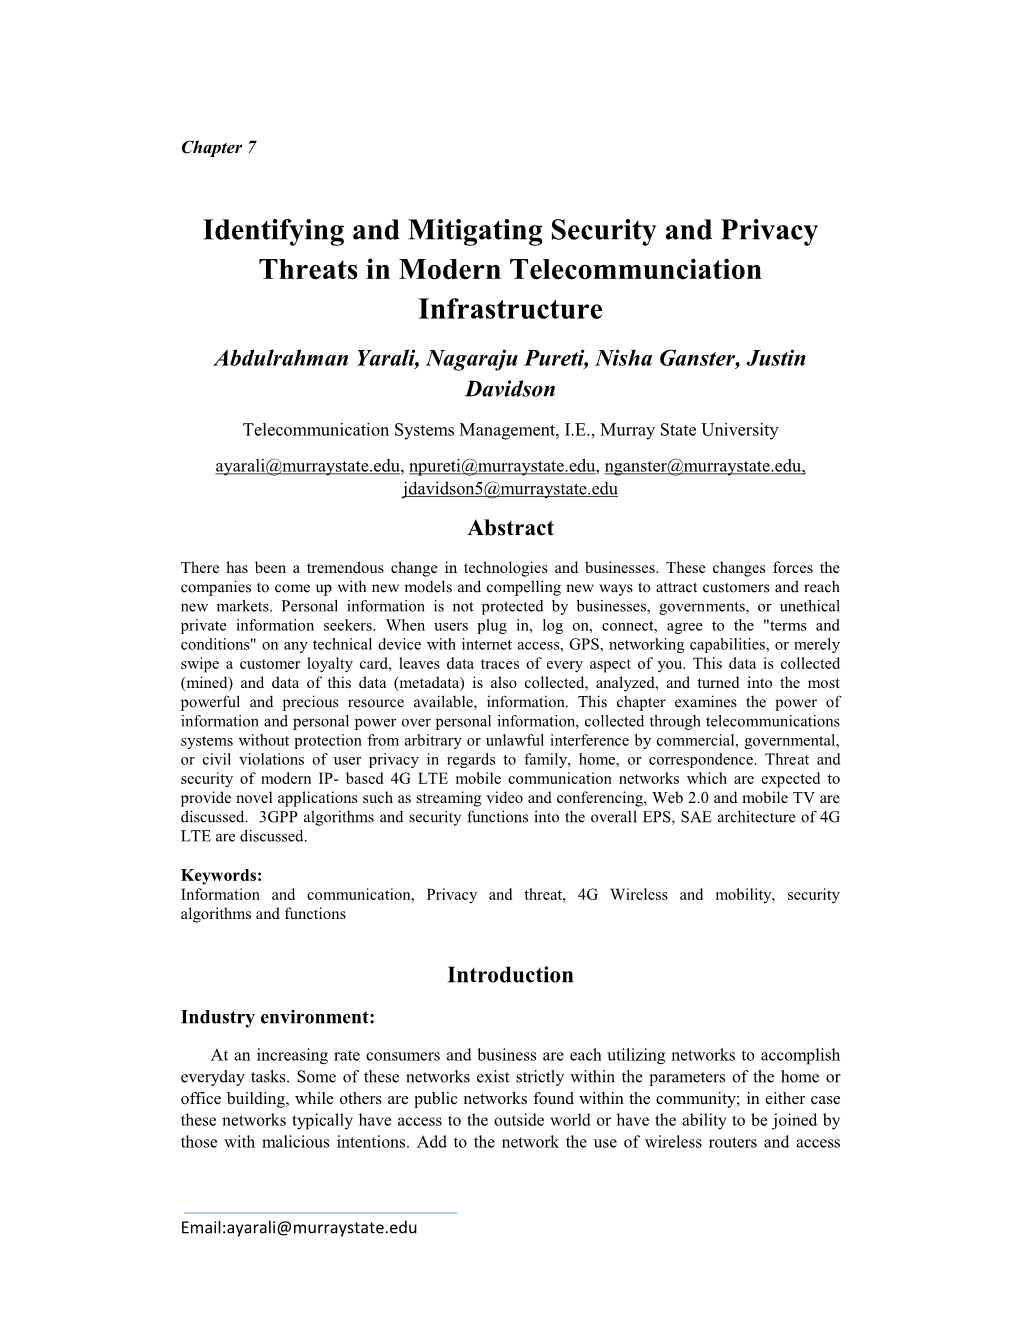 Identifying and Mitigating Security and Privacy Threats in Modern